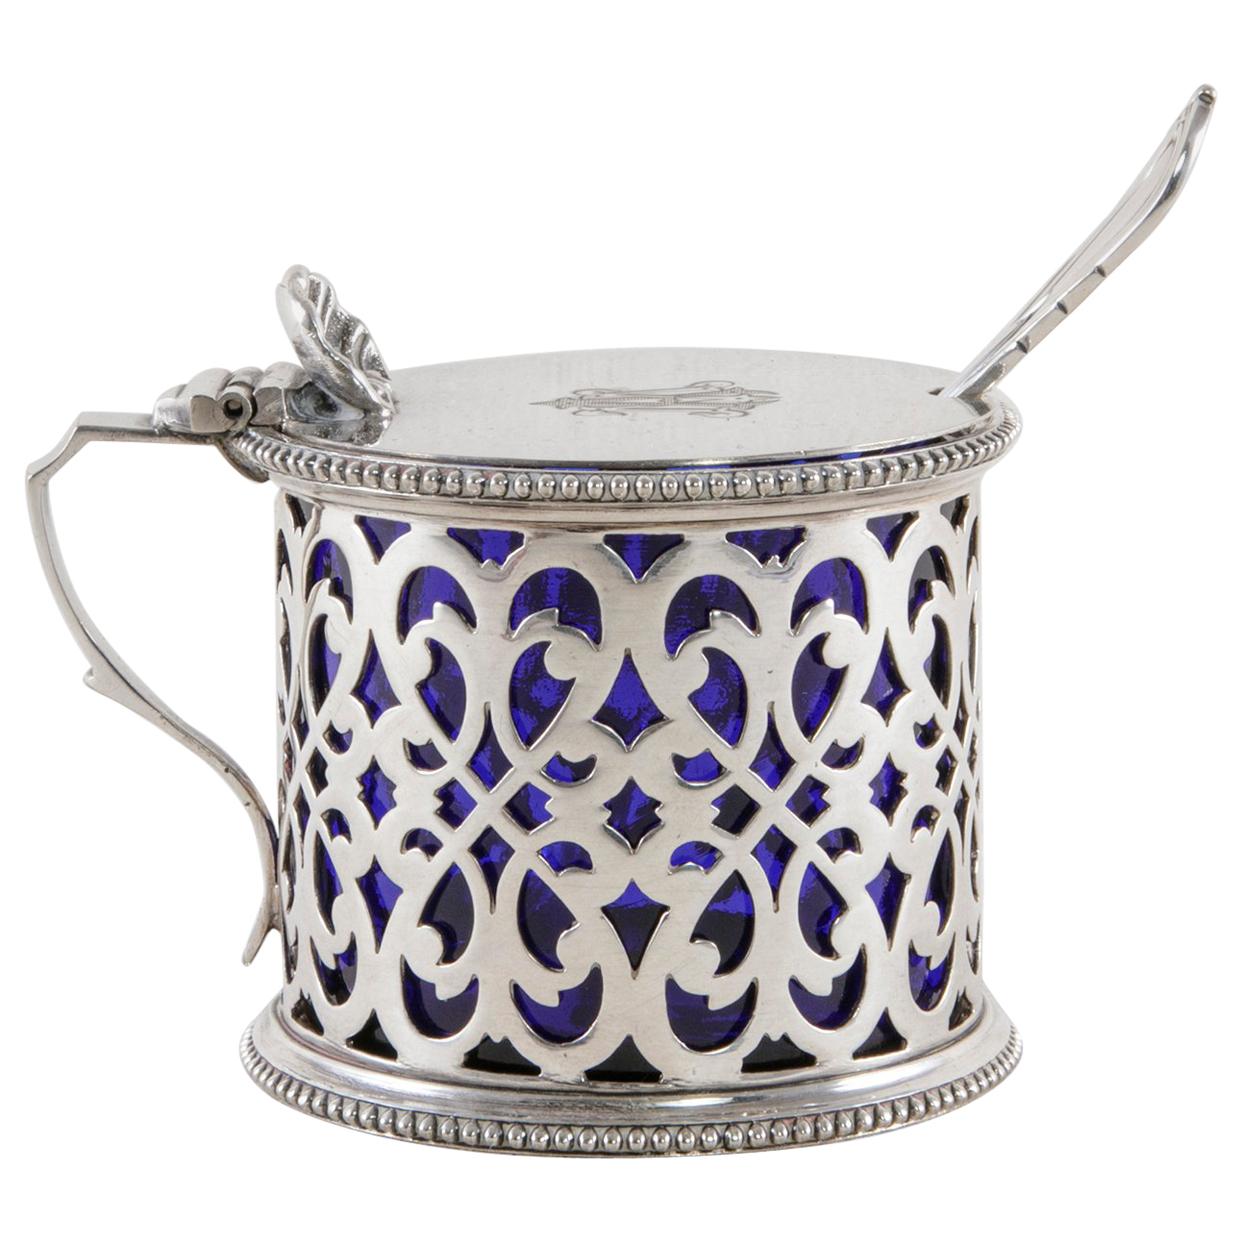 Late 19th Century English Silver Plate Mustard Pot with Lid Spoon, Glass Insert